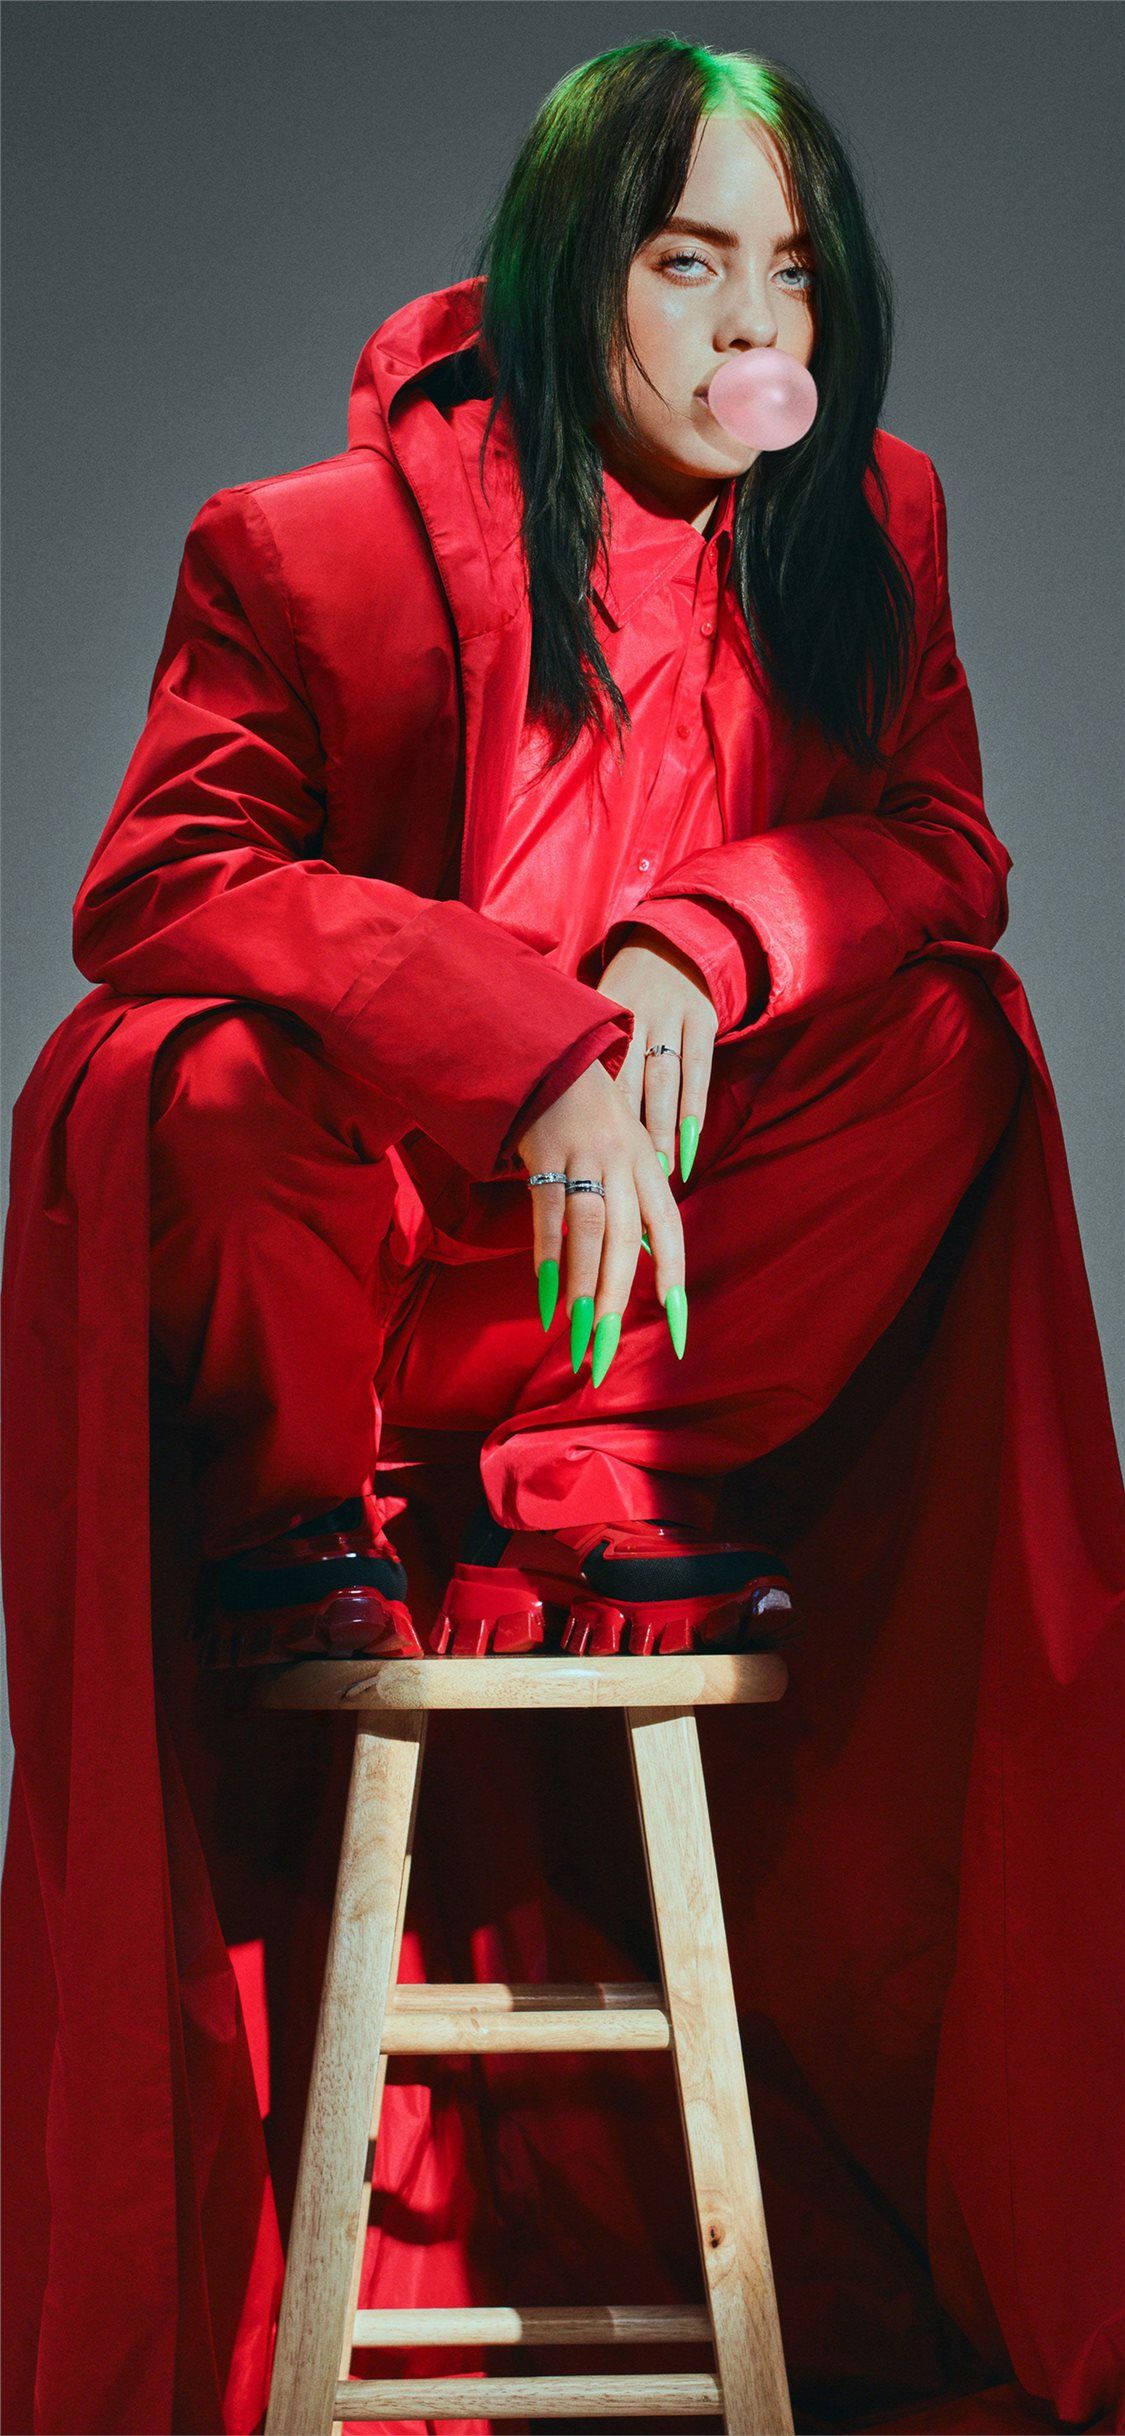 A person sitting on top of stool in red - Billie Eilish